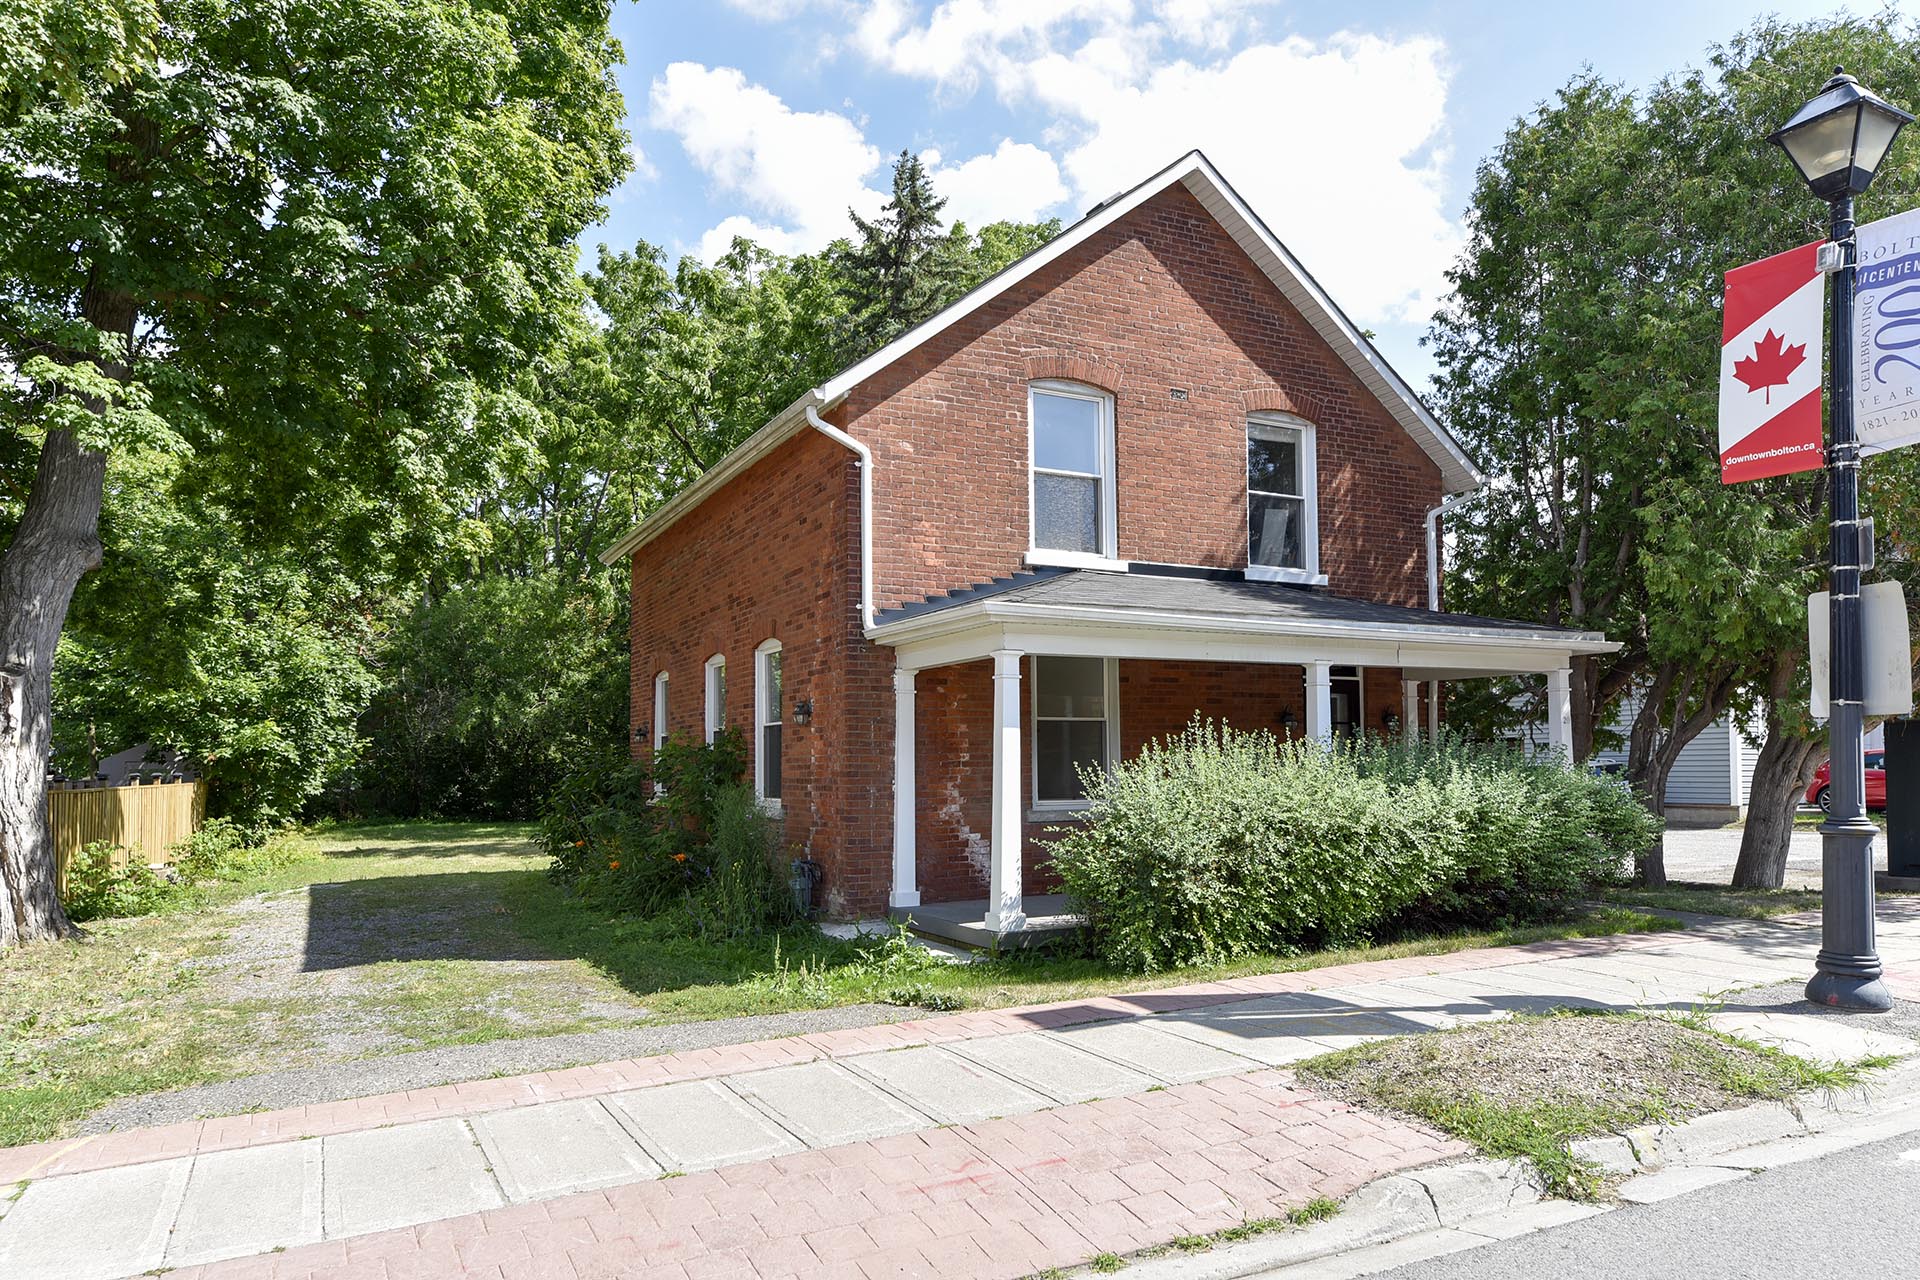 29 King Street West, Bolton, ON, commercial building for sale, klein